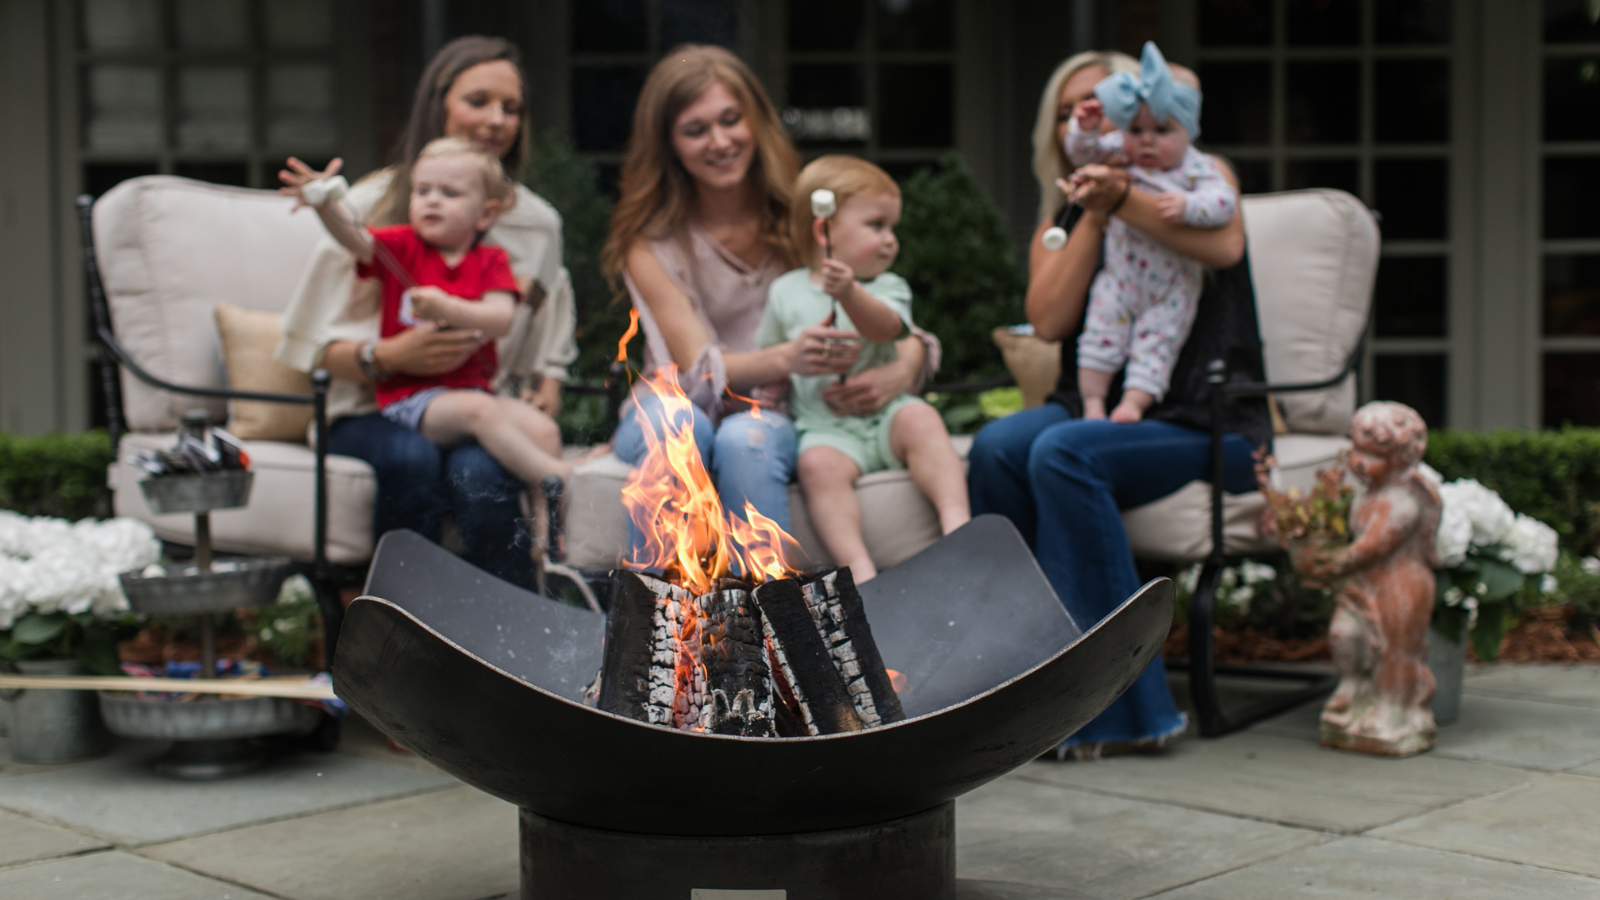 Outdoor heating and Fire Pit Safety Guide